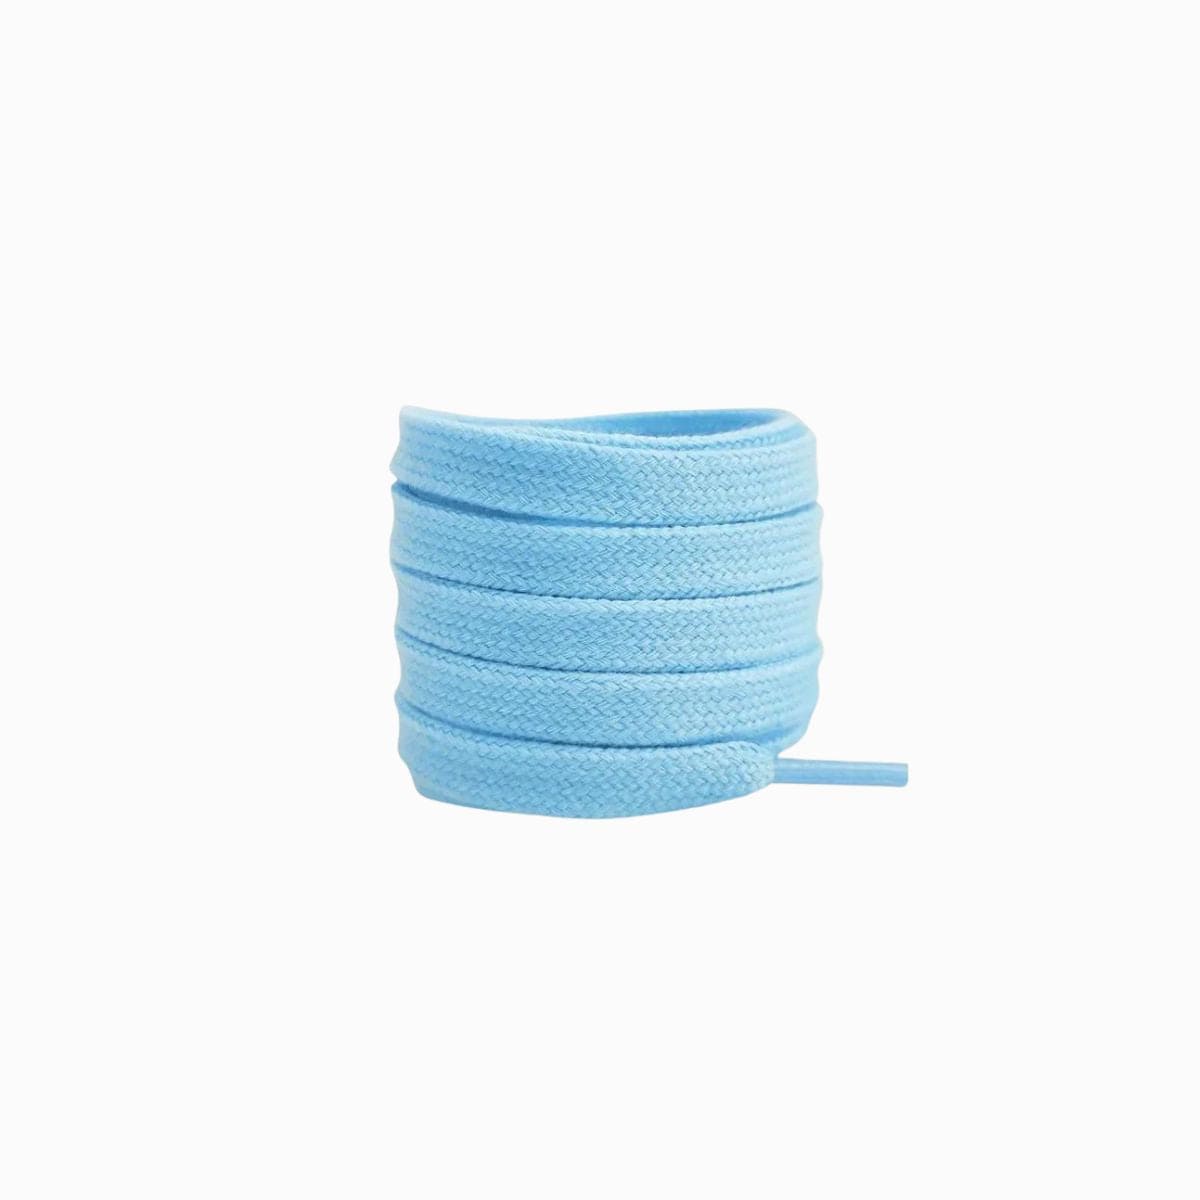 Light Blue Replacement Adidas Shoe Laces for Adidas Samba OG Sneakers by Kicks Shoelaces